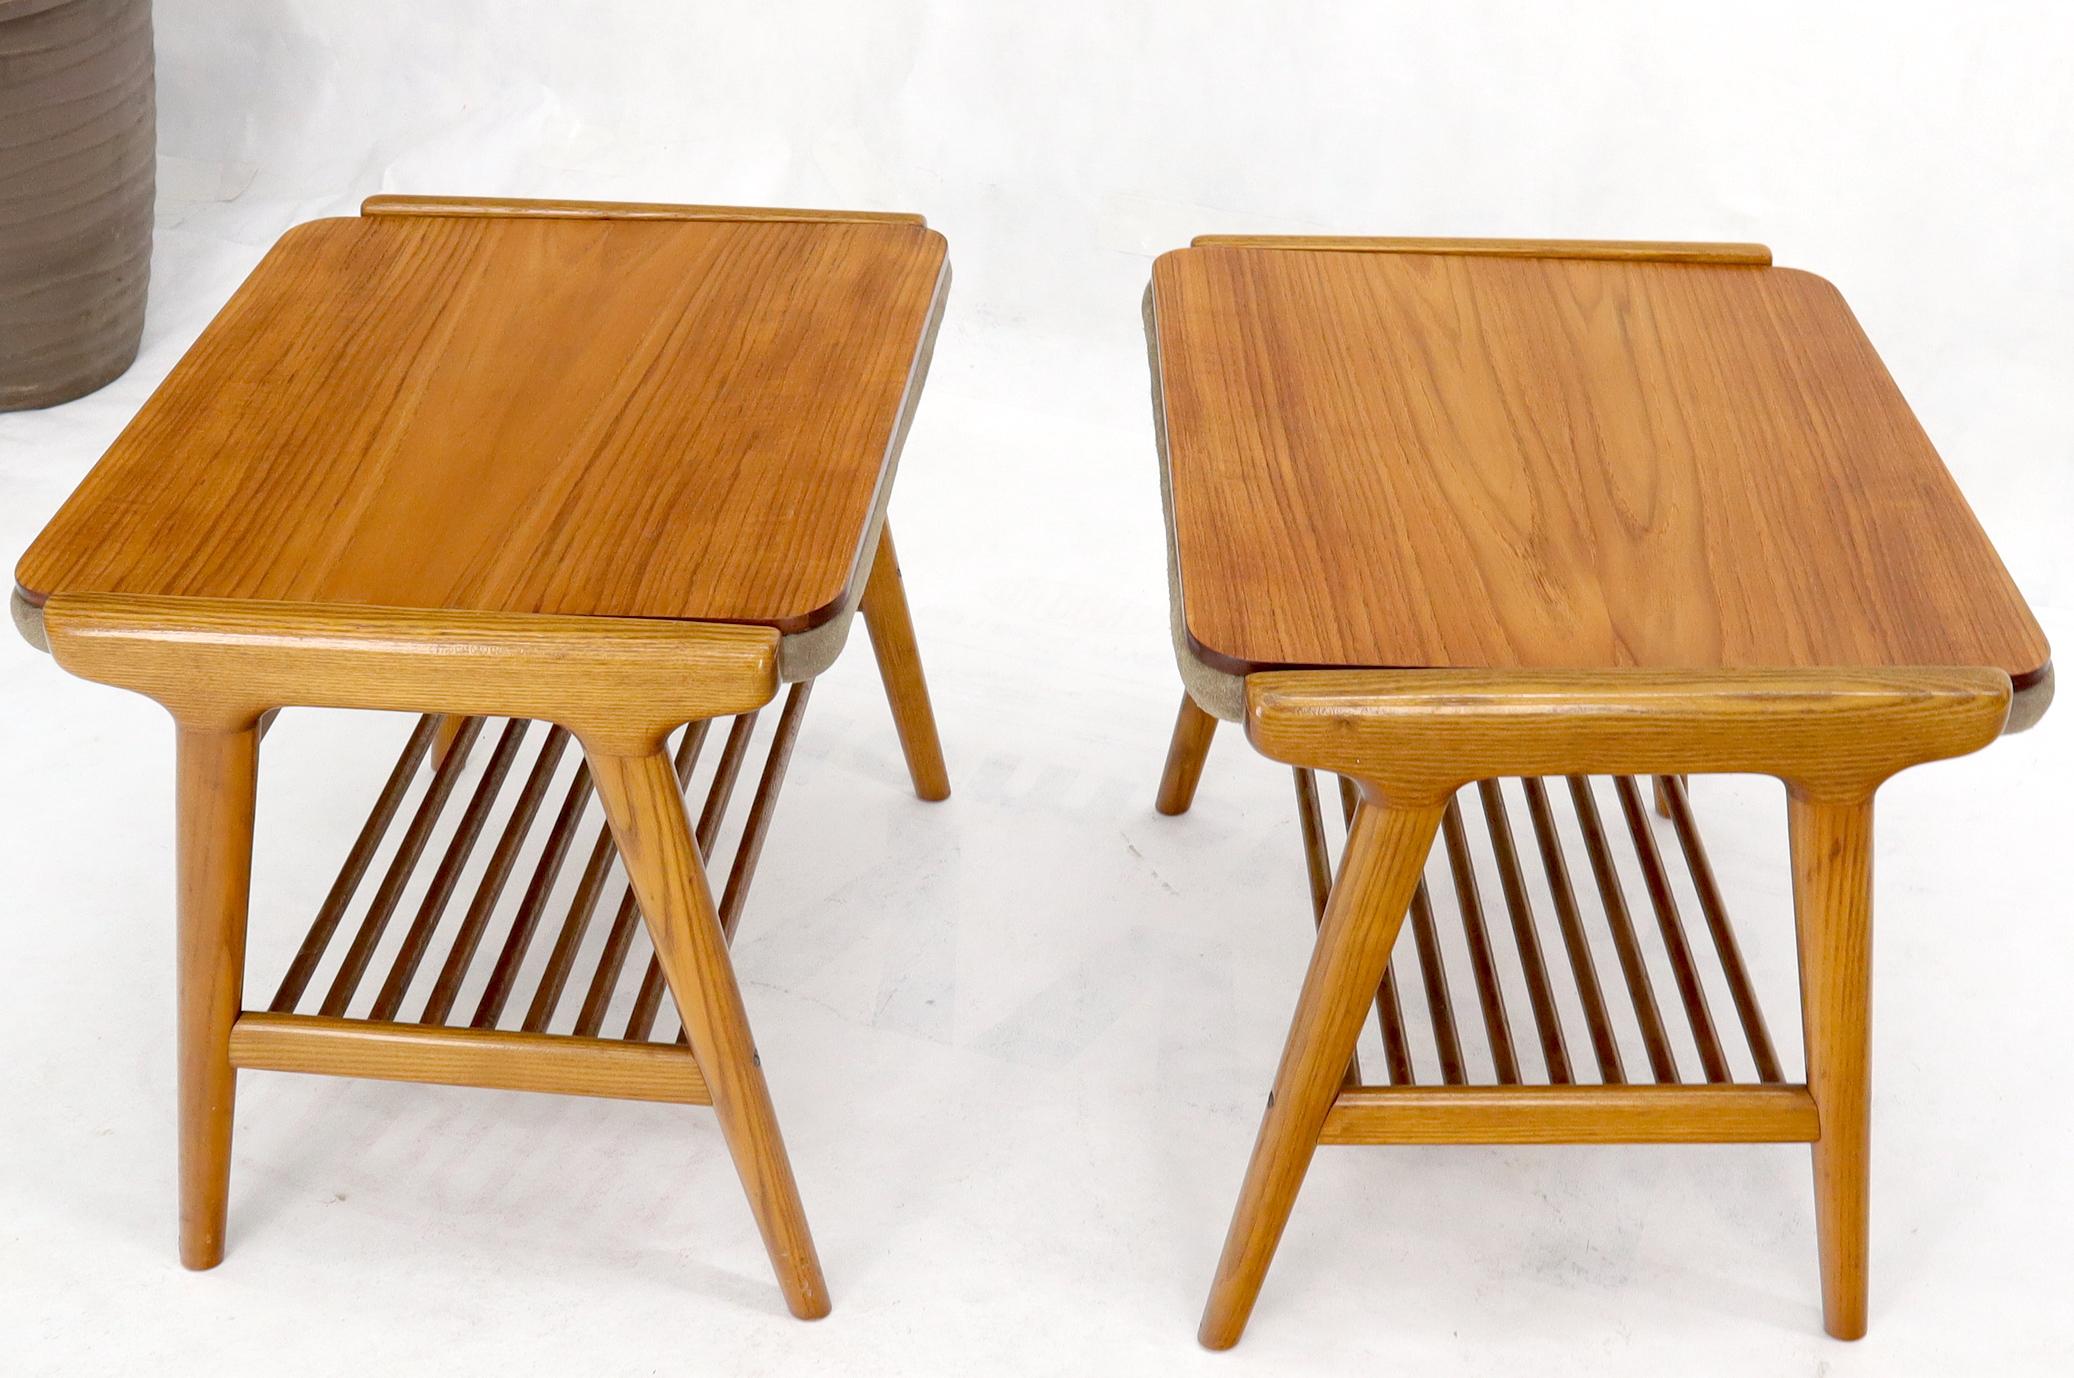 Pair of Danish Teak Mid-Century Modern Flip Top Tables Suede Benches For Sale 3